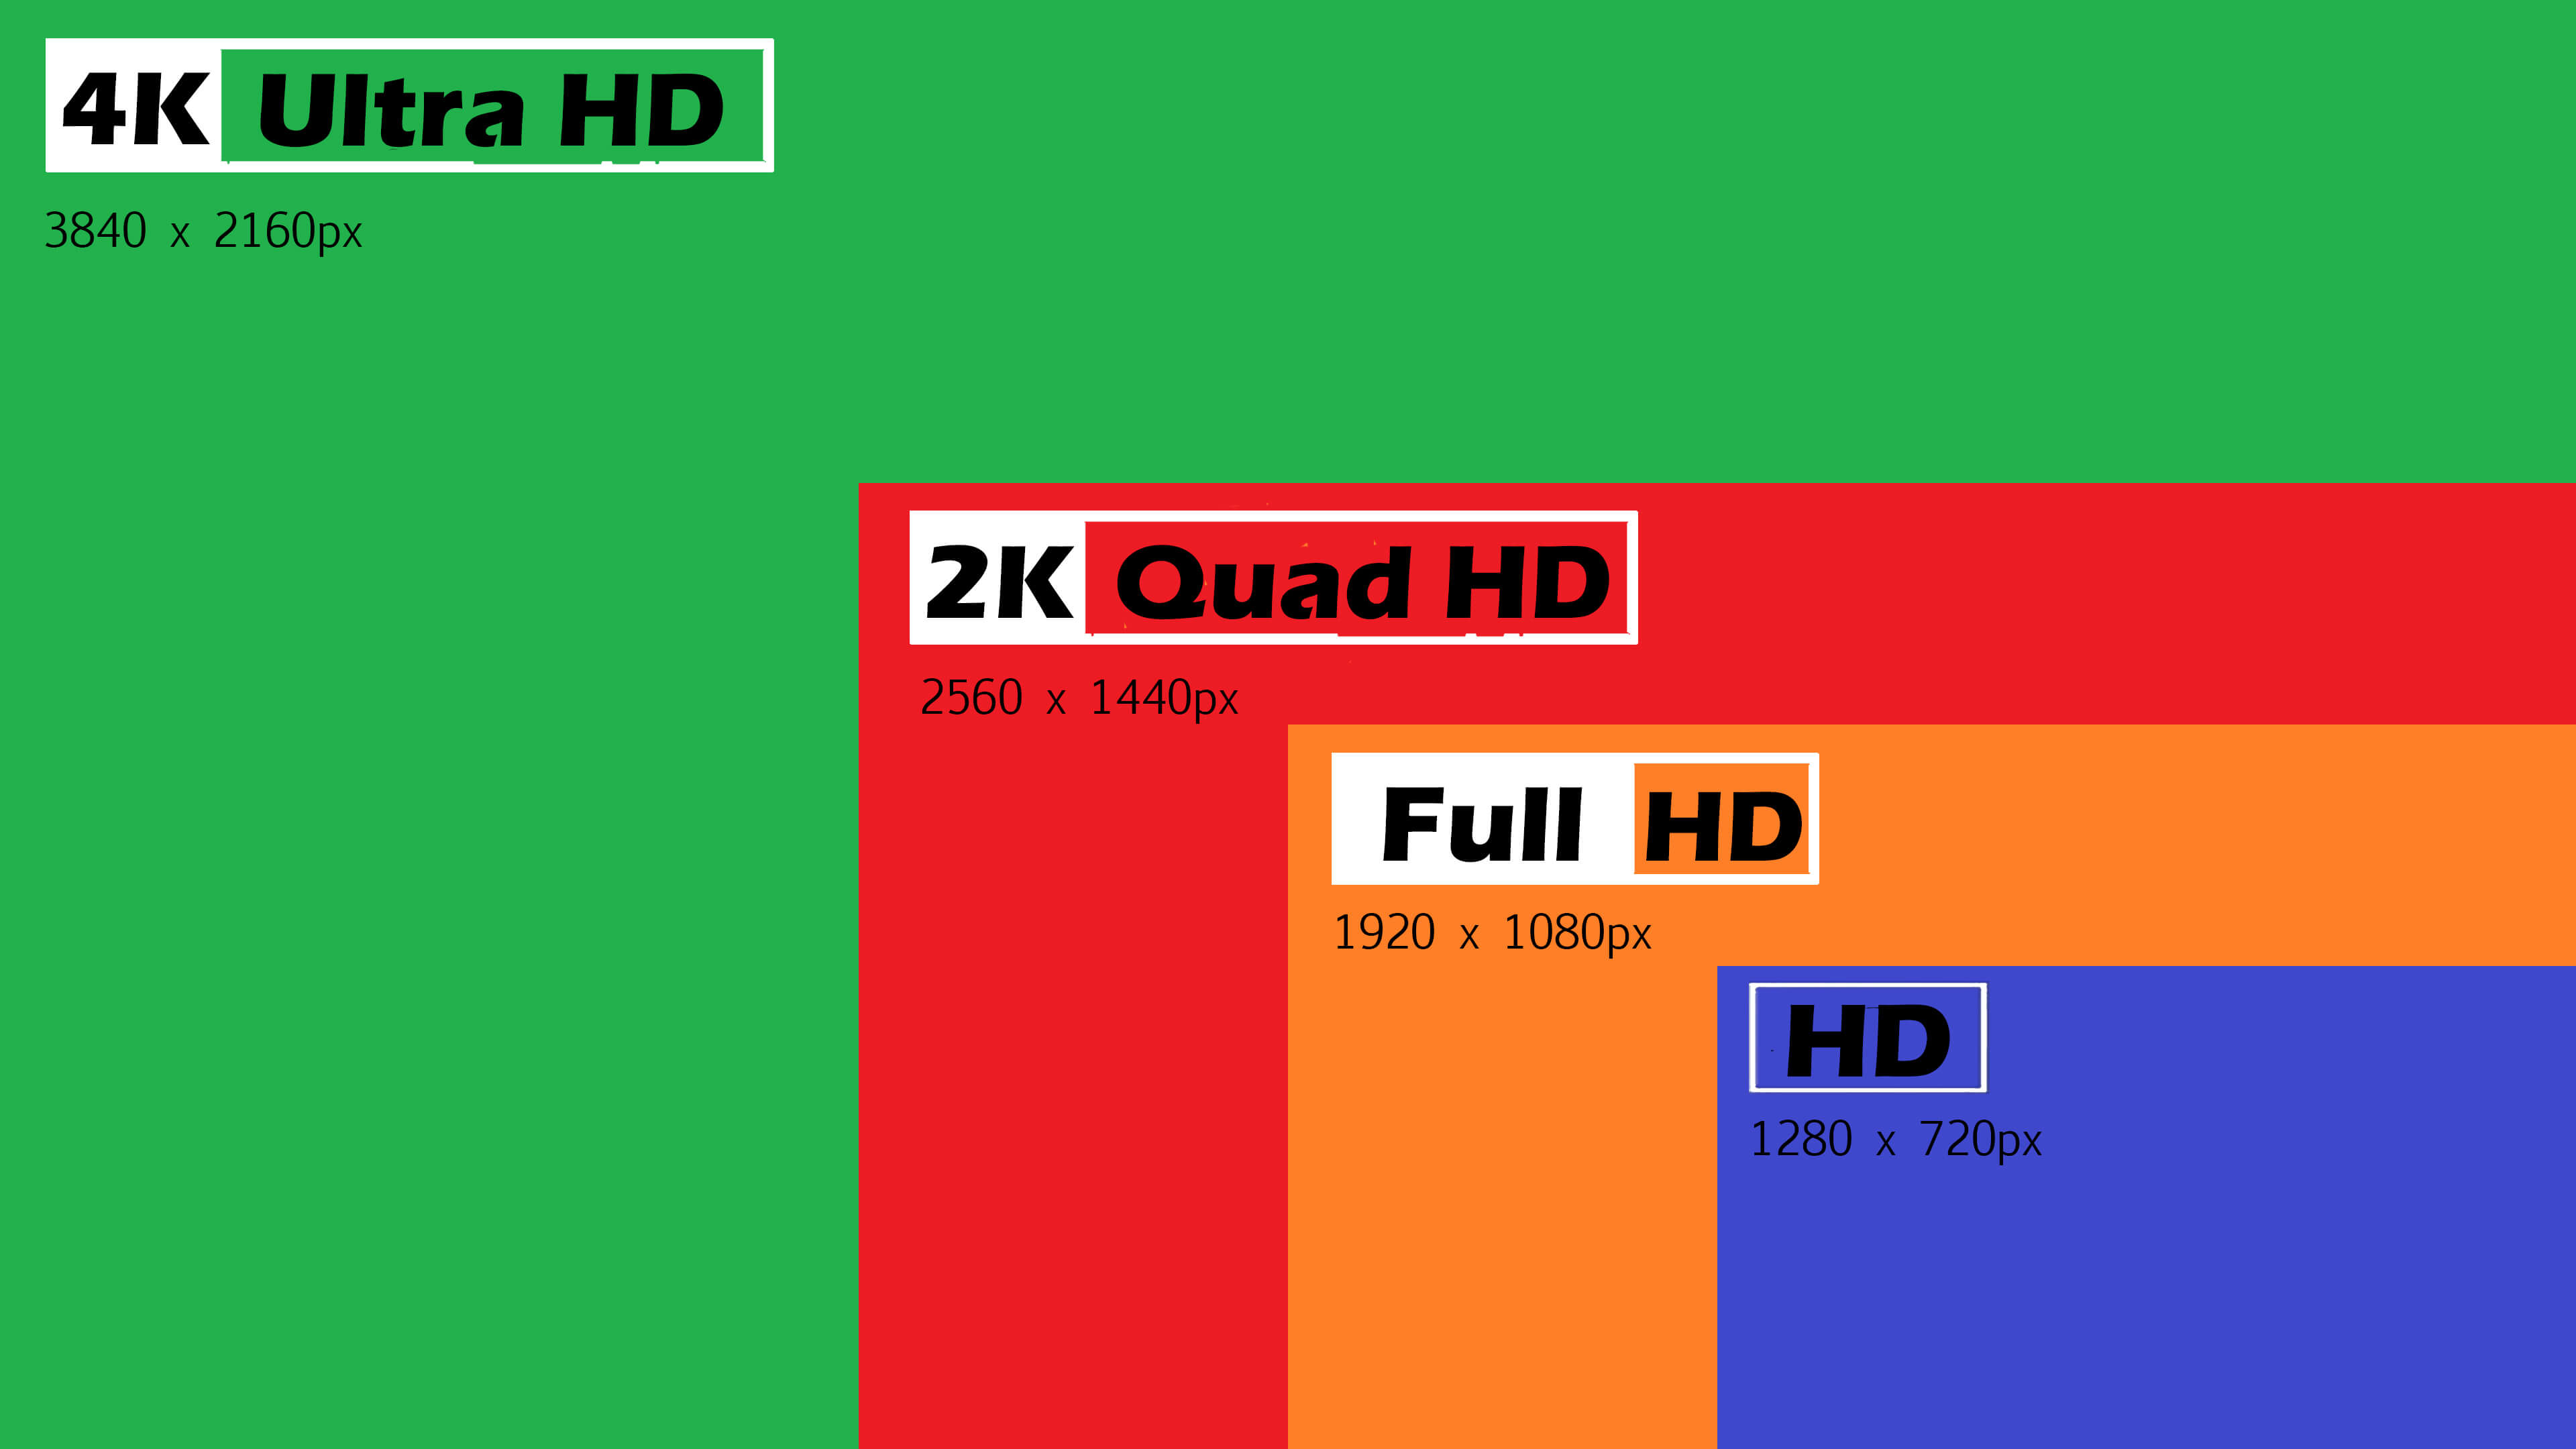 4k-ptz-and-2k-ptz-cameras-which-one-suits-your-needs